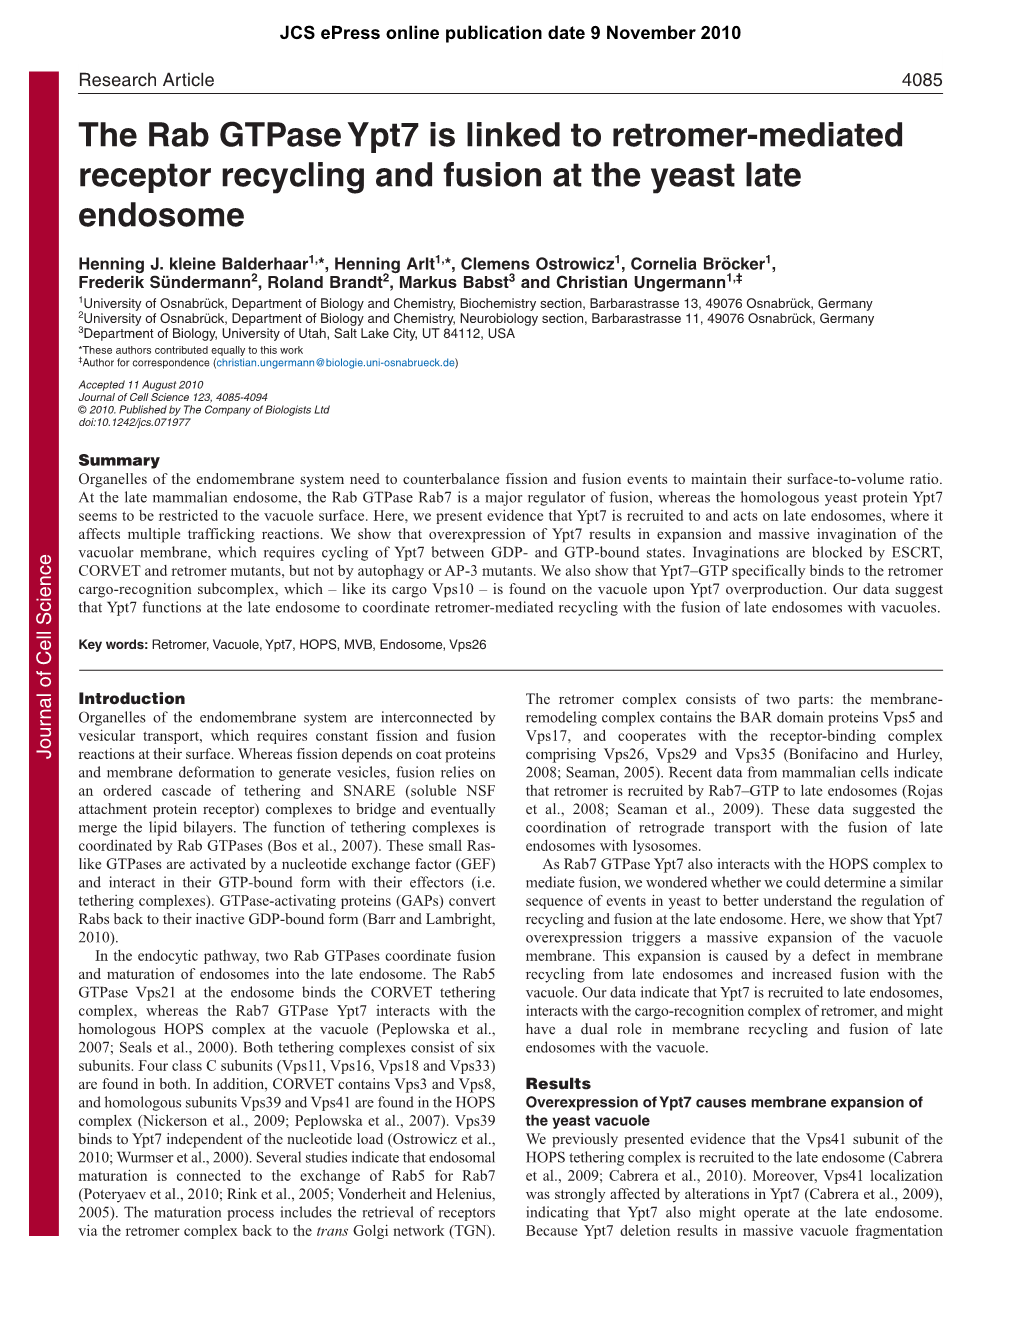 The Rab Gtpase Ypt7 Is Linked to Retromer-Mediated Receptor Recycling and Fusion at the Yeast Late Endosome